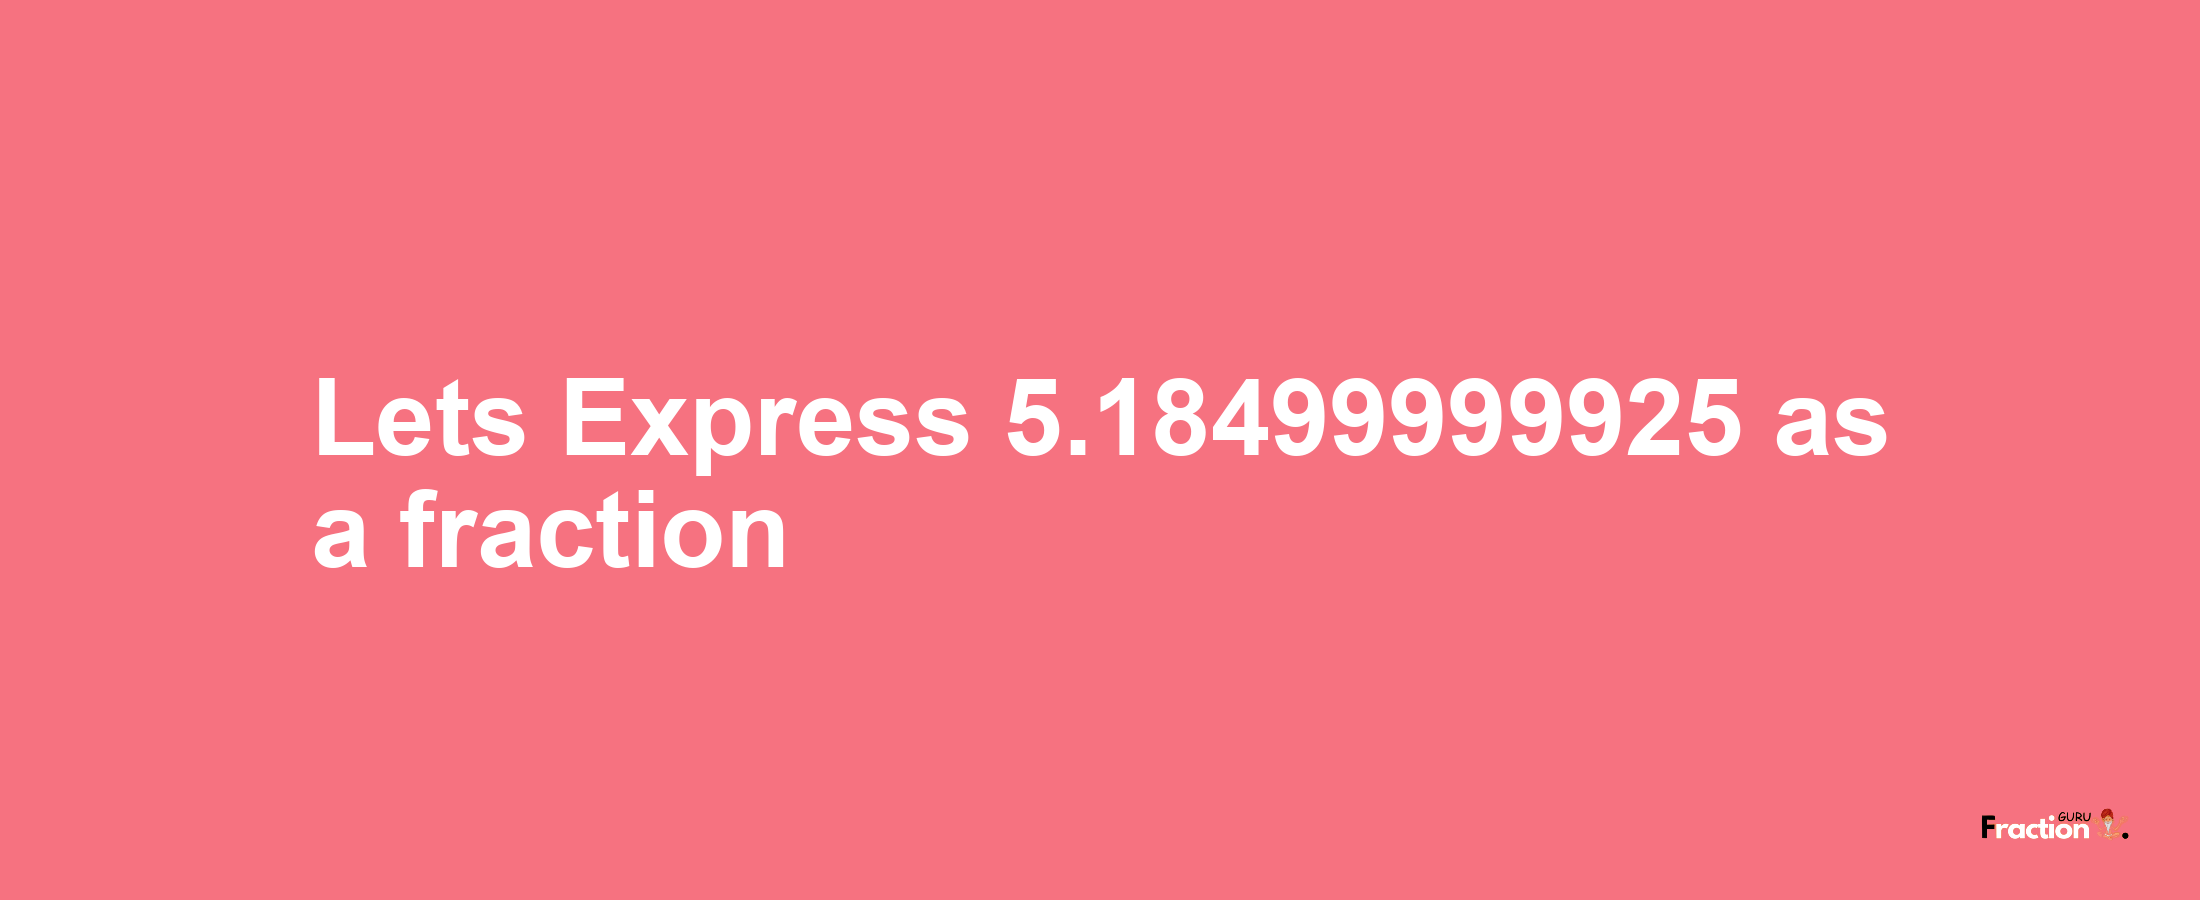 Lets Express 5.18499999925 as afraction